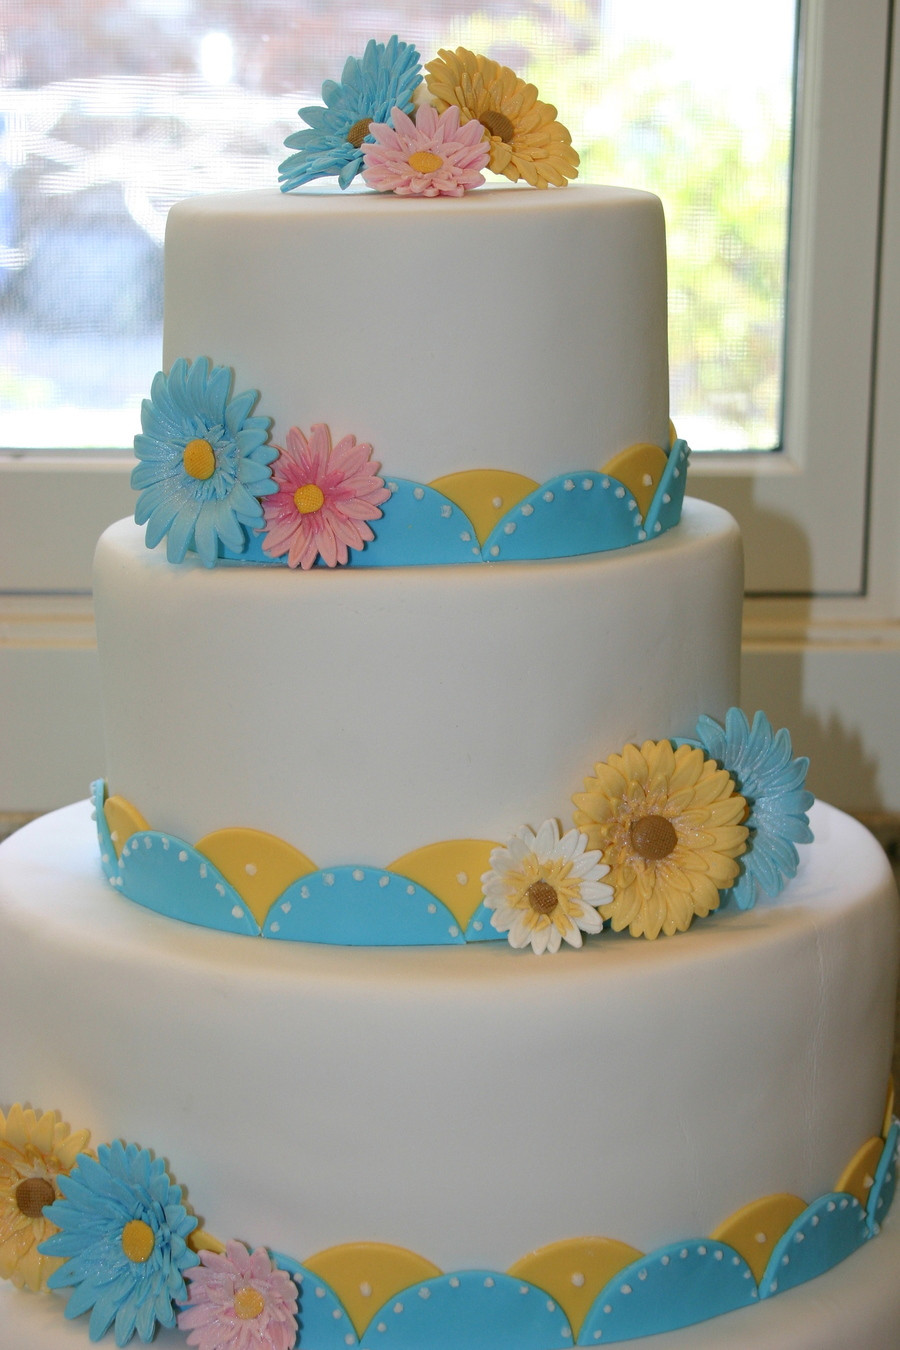 Wedding Cakes With Daisies
 Gerbera Daisy Wedding Cake CakeCentral